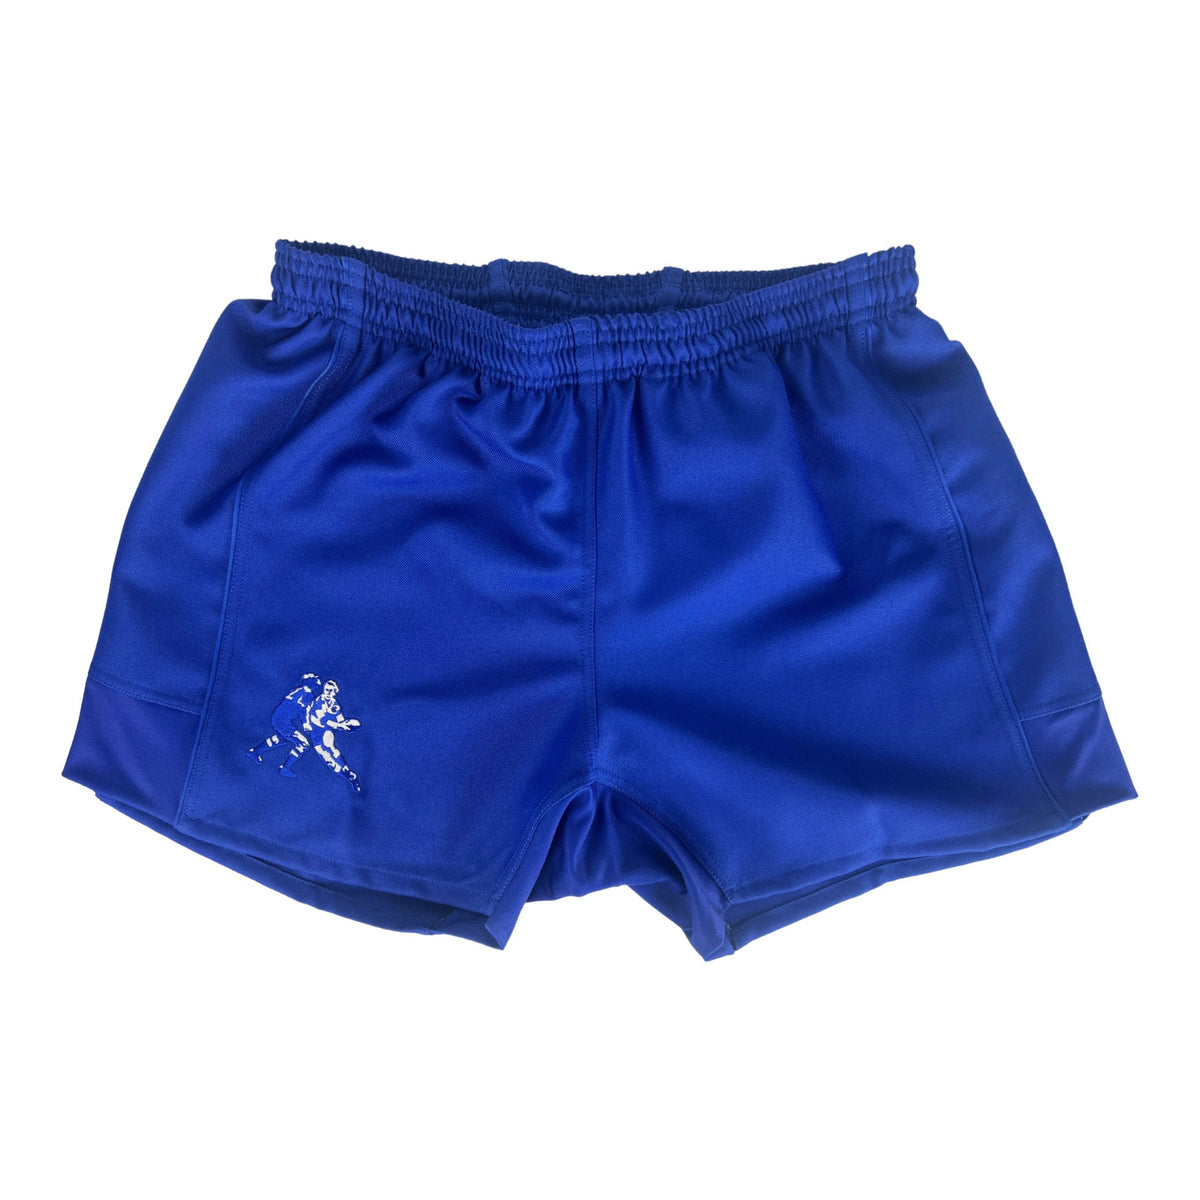 Rugby Shorts - World Rugby Shop